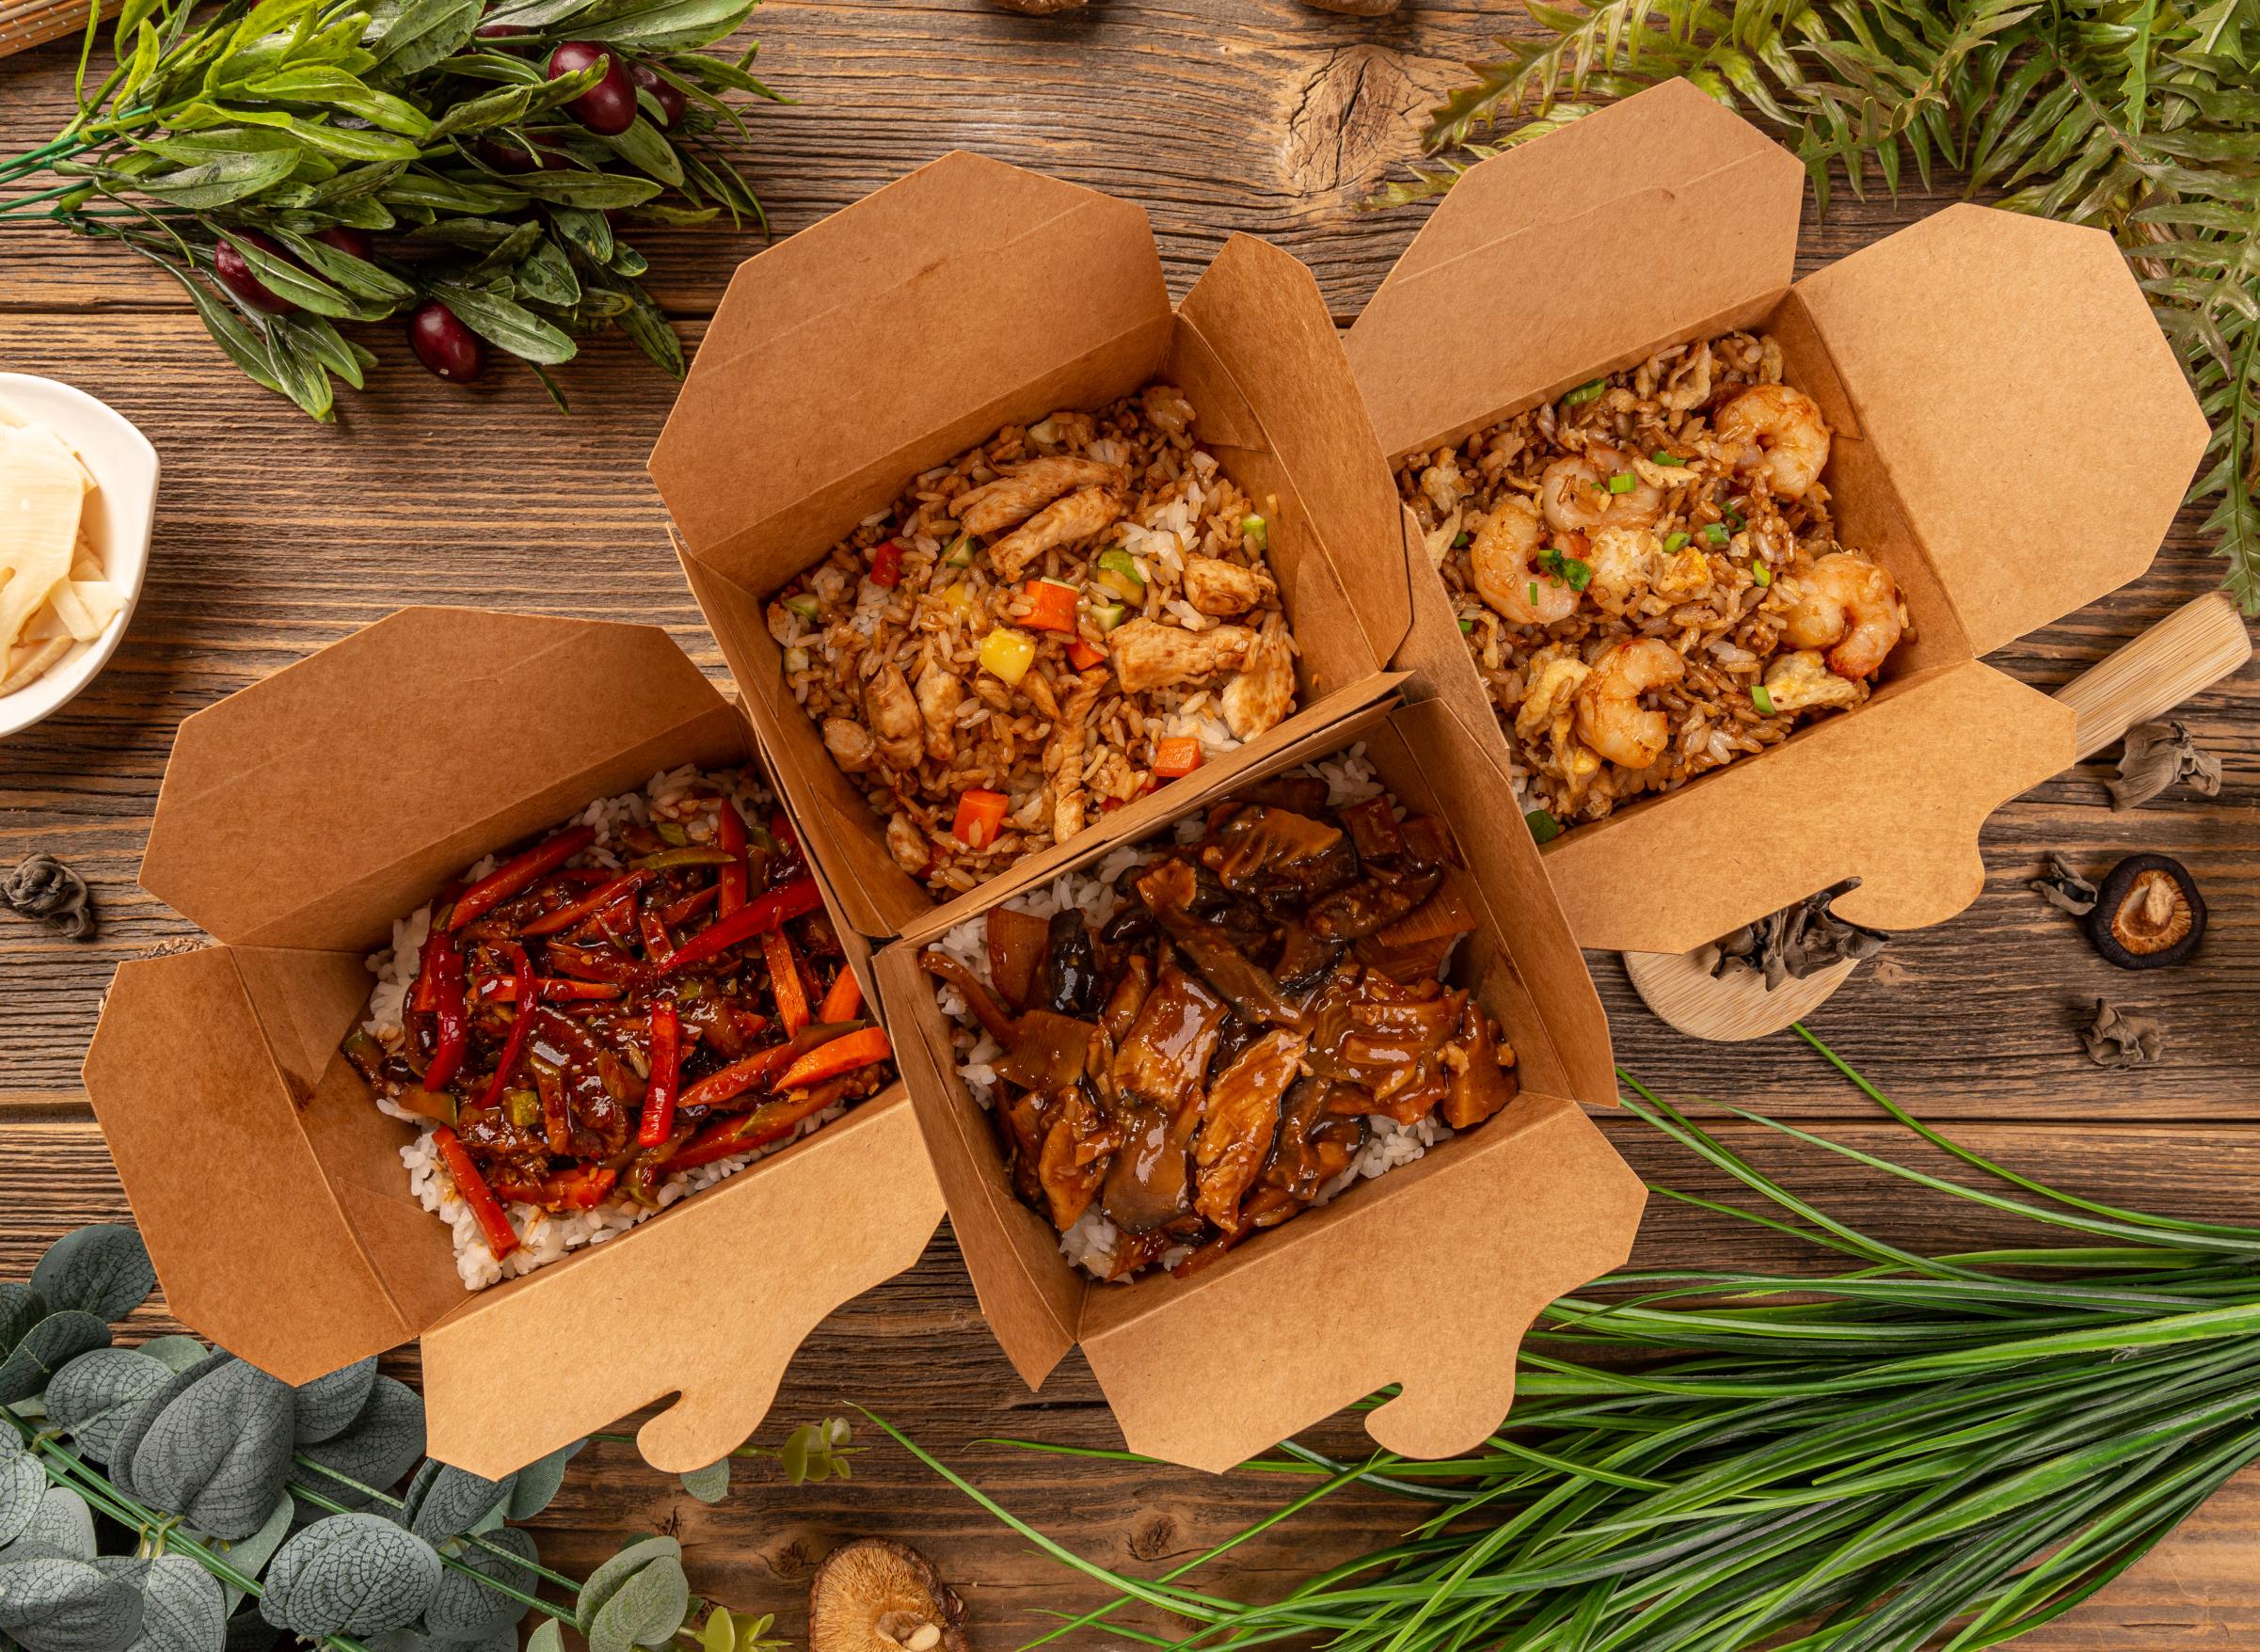 Types of Takeout Food Containers Explained - Find the Right One!